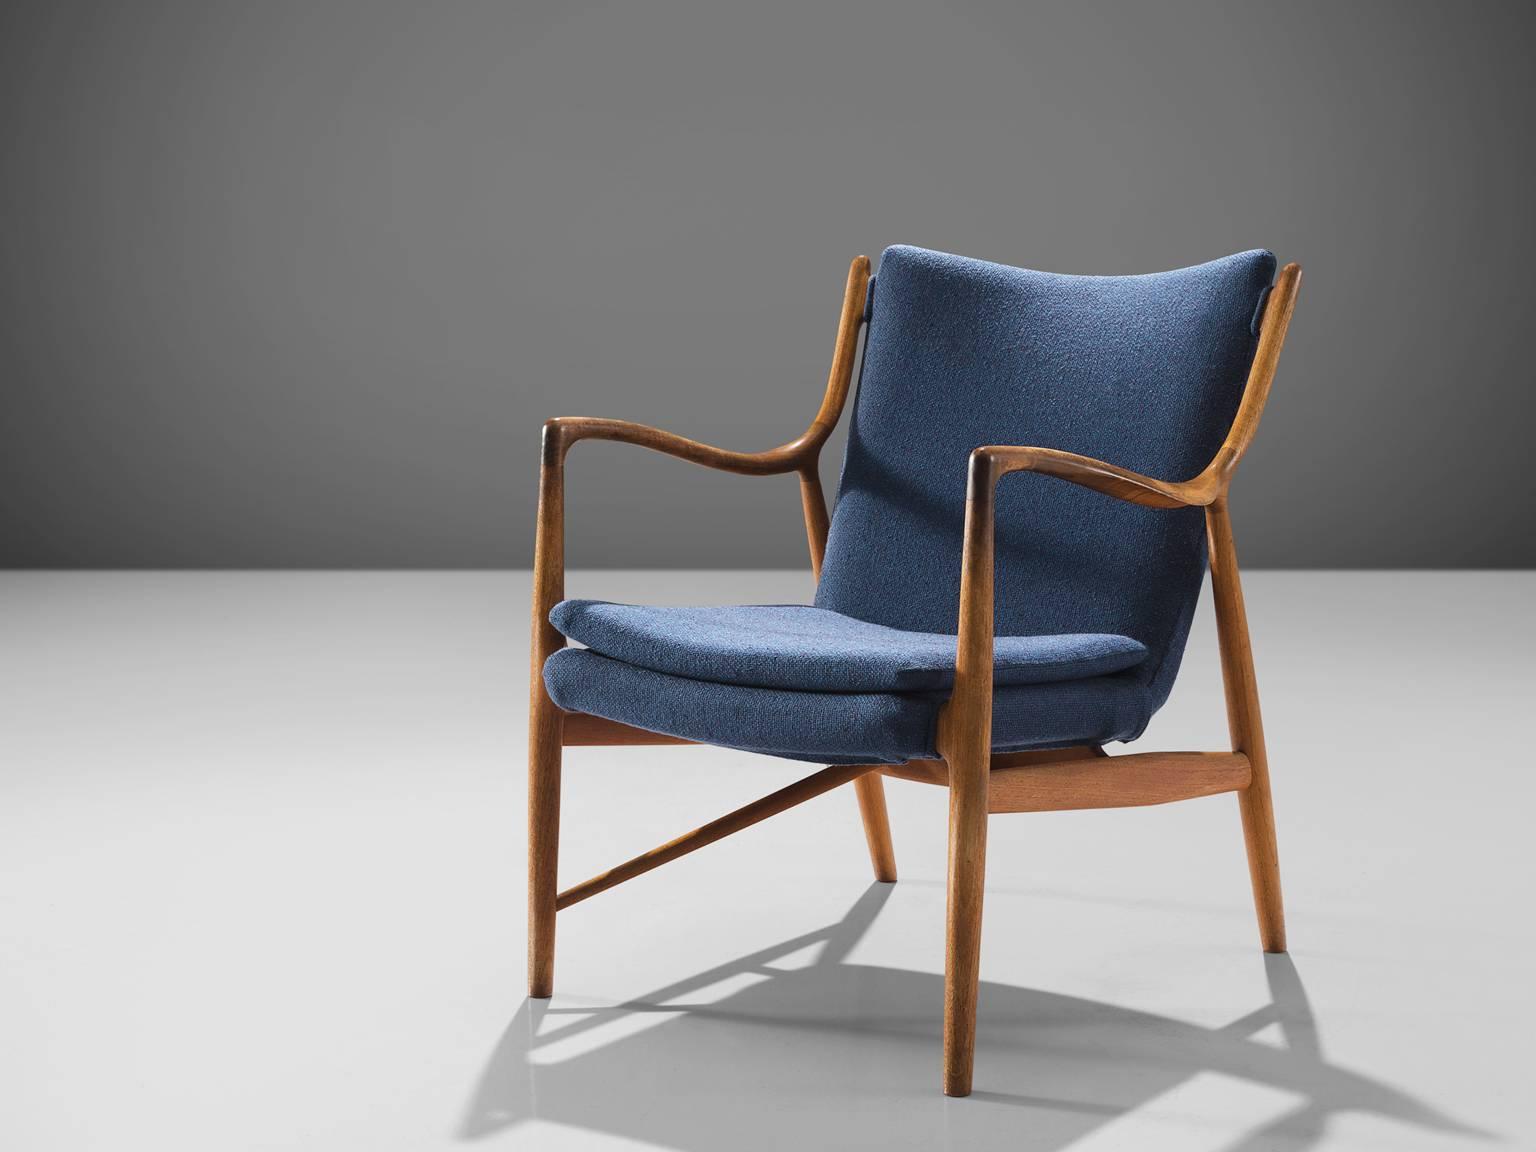 Finn Juhl for Niels Vodder, NV45, teak and fabric, Denmark, design 1945, production, 1950s. 

This NV45 chair by Finn Juhl and Niels Vodder is executed in teak and blue fabric. The chair is made by master woodworker Niels Vodder and is marked on the